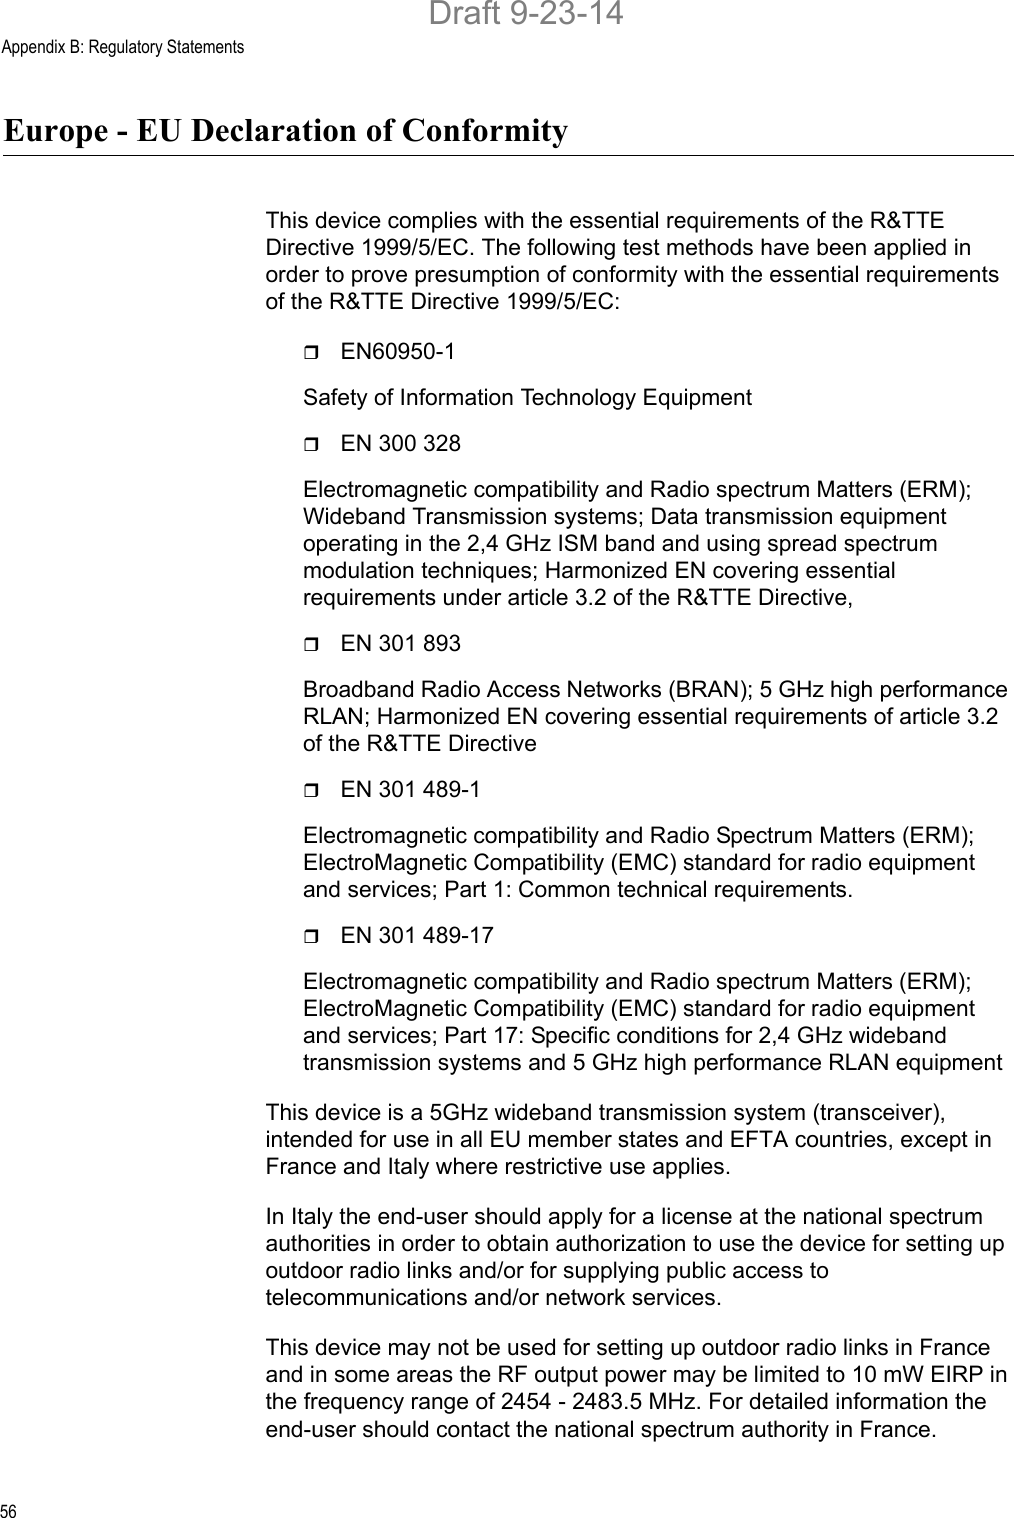 Appendix B: Regulatory Statements56Europe - EU Declaration of ConformityThis device complies with the essential requirements of the R&amp;TTE Directive 1999/5/EC. The following test methods have been applied in order to prove presumption of conformity with the essential requirements of the R&amp;TTE Directive 1999/5/EC:EN60950-1Safety of Information Technology EquipmentEN 300 328Electromagnetic compatibility and Radio spectrum Matters (ERM); Wideband Transmission systems; Data transmission equipment operating in the 2,4 GHz ISM band and using spread spectrum modulation techniques; Harmonized EN covering essential requirements under article 3.2 of the R&amp;TTE Directive,EN 301 893Broadband Radio Access Networks (BRAN); 5 GHz high performance RLAN; Harmonized EN covering essential requirements of article 3.2 of the R&amp;TTE DirectiveEN 301 489-1Electromagnetic compatibility and Radio Spectrum Matters (ERM); ElectroMagnetic Compatibility (EMC) standard for radio equipment and services; Part 1: Common technical requirements.EN 301 489-17Electromagnetic compatibility and Radio spectrum Matters (ERM); ElectroMagnetic Compatibility (EMC) standard for radio equipment and services; Part 17: Specific conditions for 2,4 GHz wideband transmission systems and 5 GHz high performance RLAN equipmentThis device is a 5GHz wideband transmission system (transceiver), intended for use in all EU member states and EFTA countries, except in France and Italy where restrictive use applies.In Italy the end-user should apply for a license at the national spectrum authorities in order to obtain authorization to use the device for setting up outdoor radio links and/or for supplying public access to telecommunications and/or network services.This device may not be used for setting up outdoor radio links in France and in some areas the RF output power may be limited to 10 mW EIRP in the frequency range of 2454 - 2483.5 MHz. For detailed information the end-user should contact the national spectrum authority in France.Draft 9-23-14